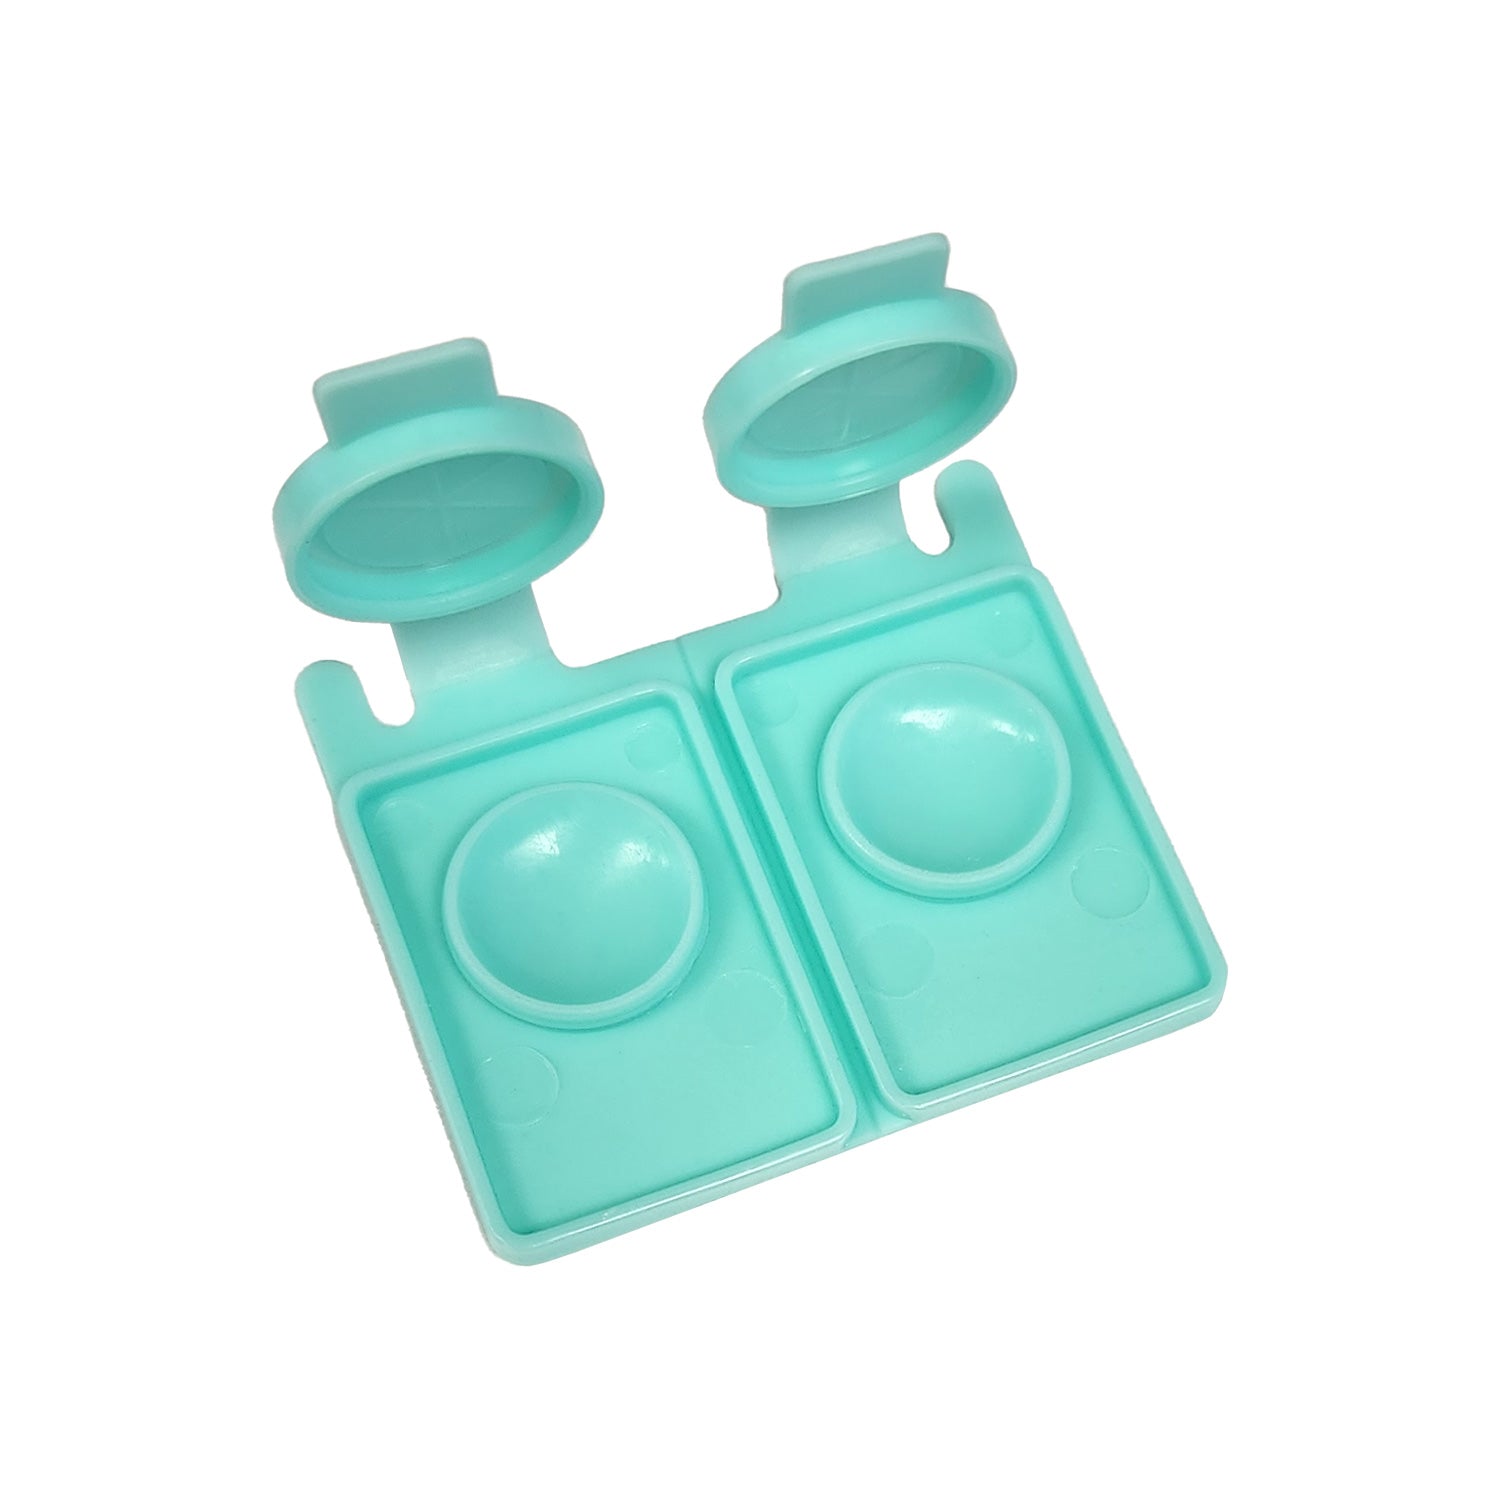 Flip-top Cases for Hard/RGP Contact Lenses